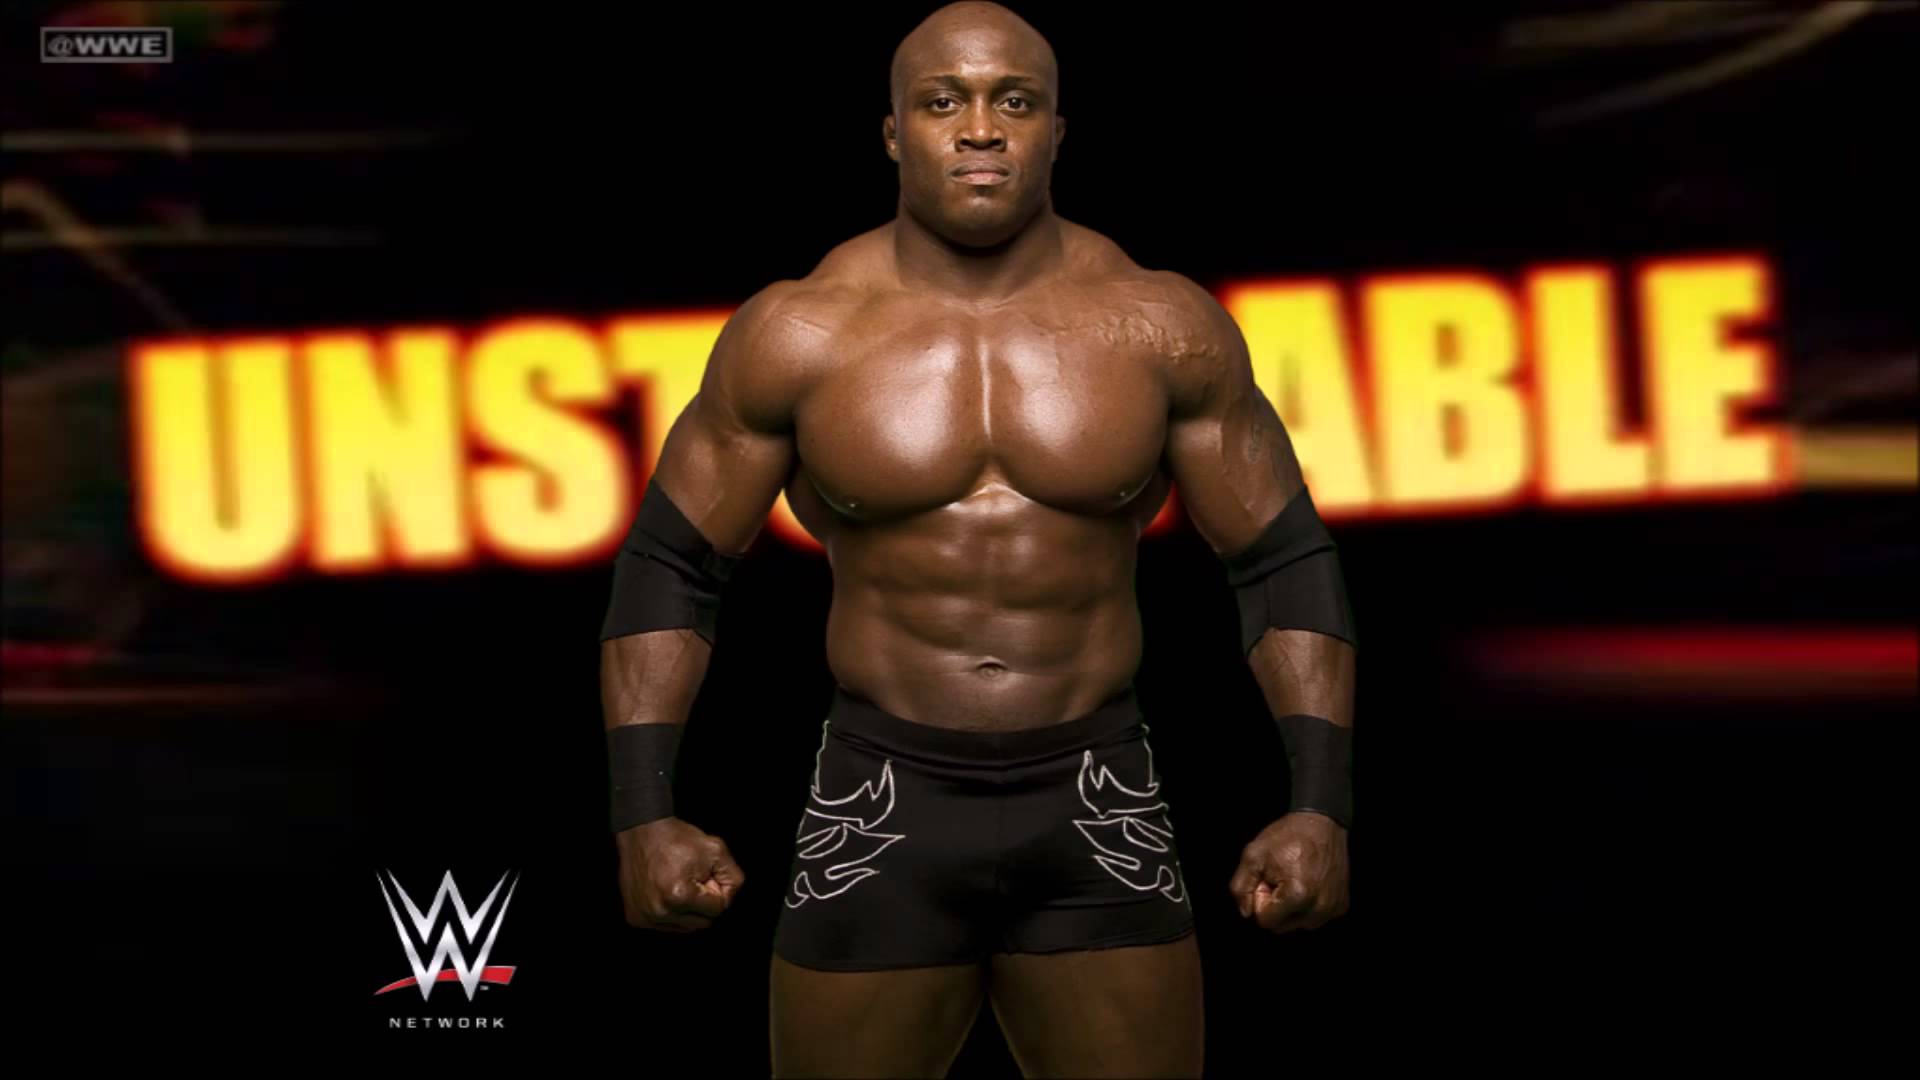 Bobby Lashley 4th WWE Theme Song For 30 minutes Will Be